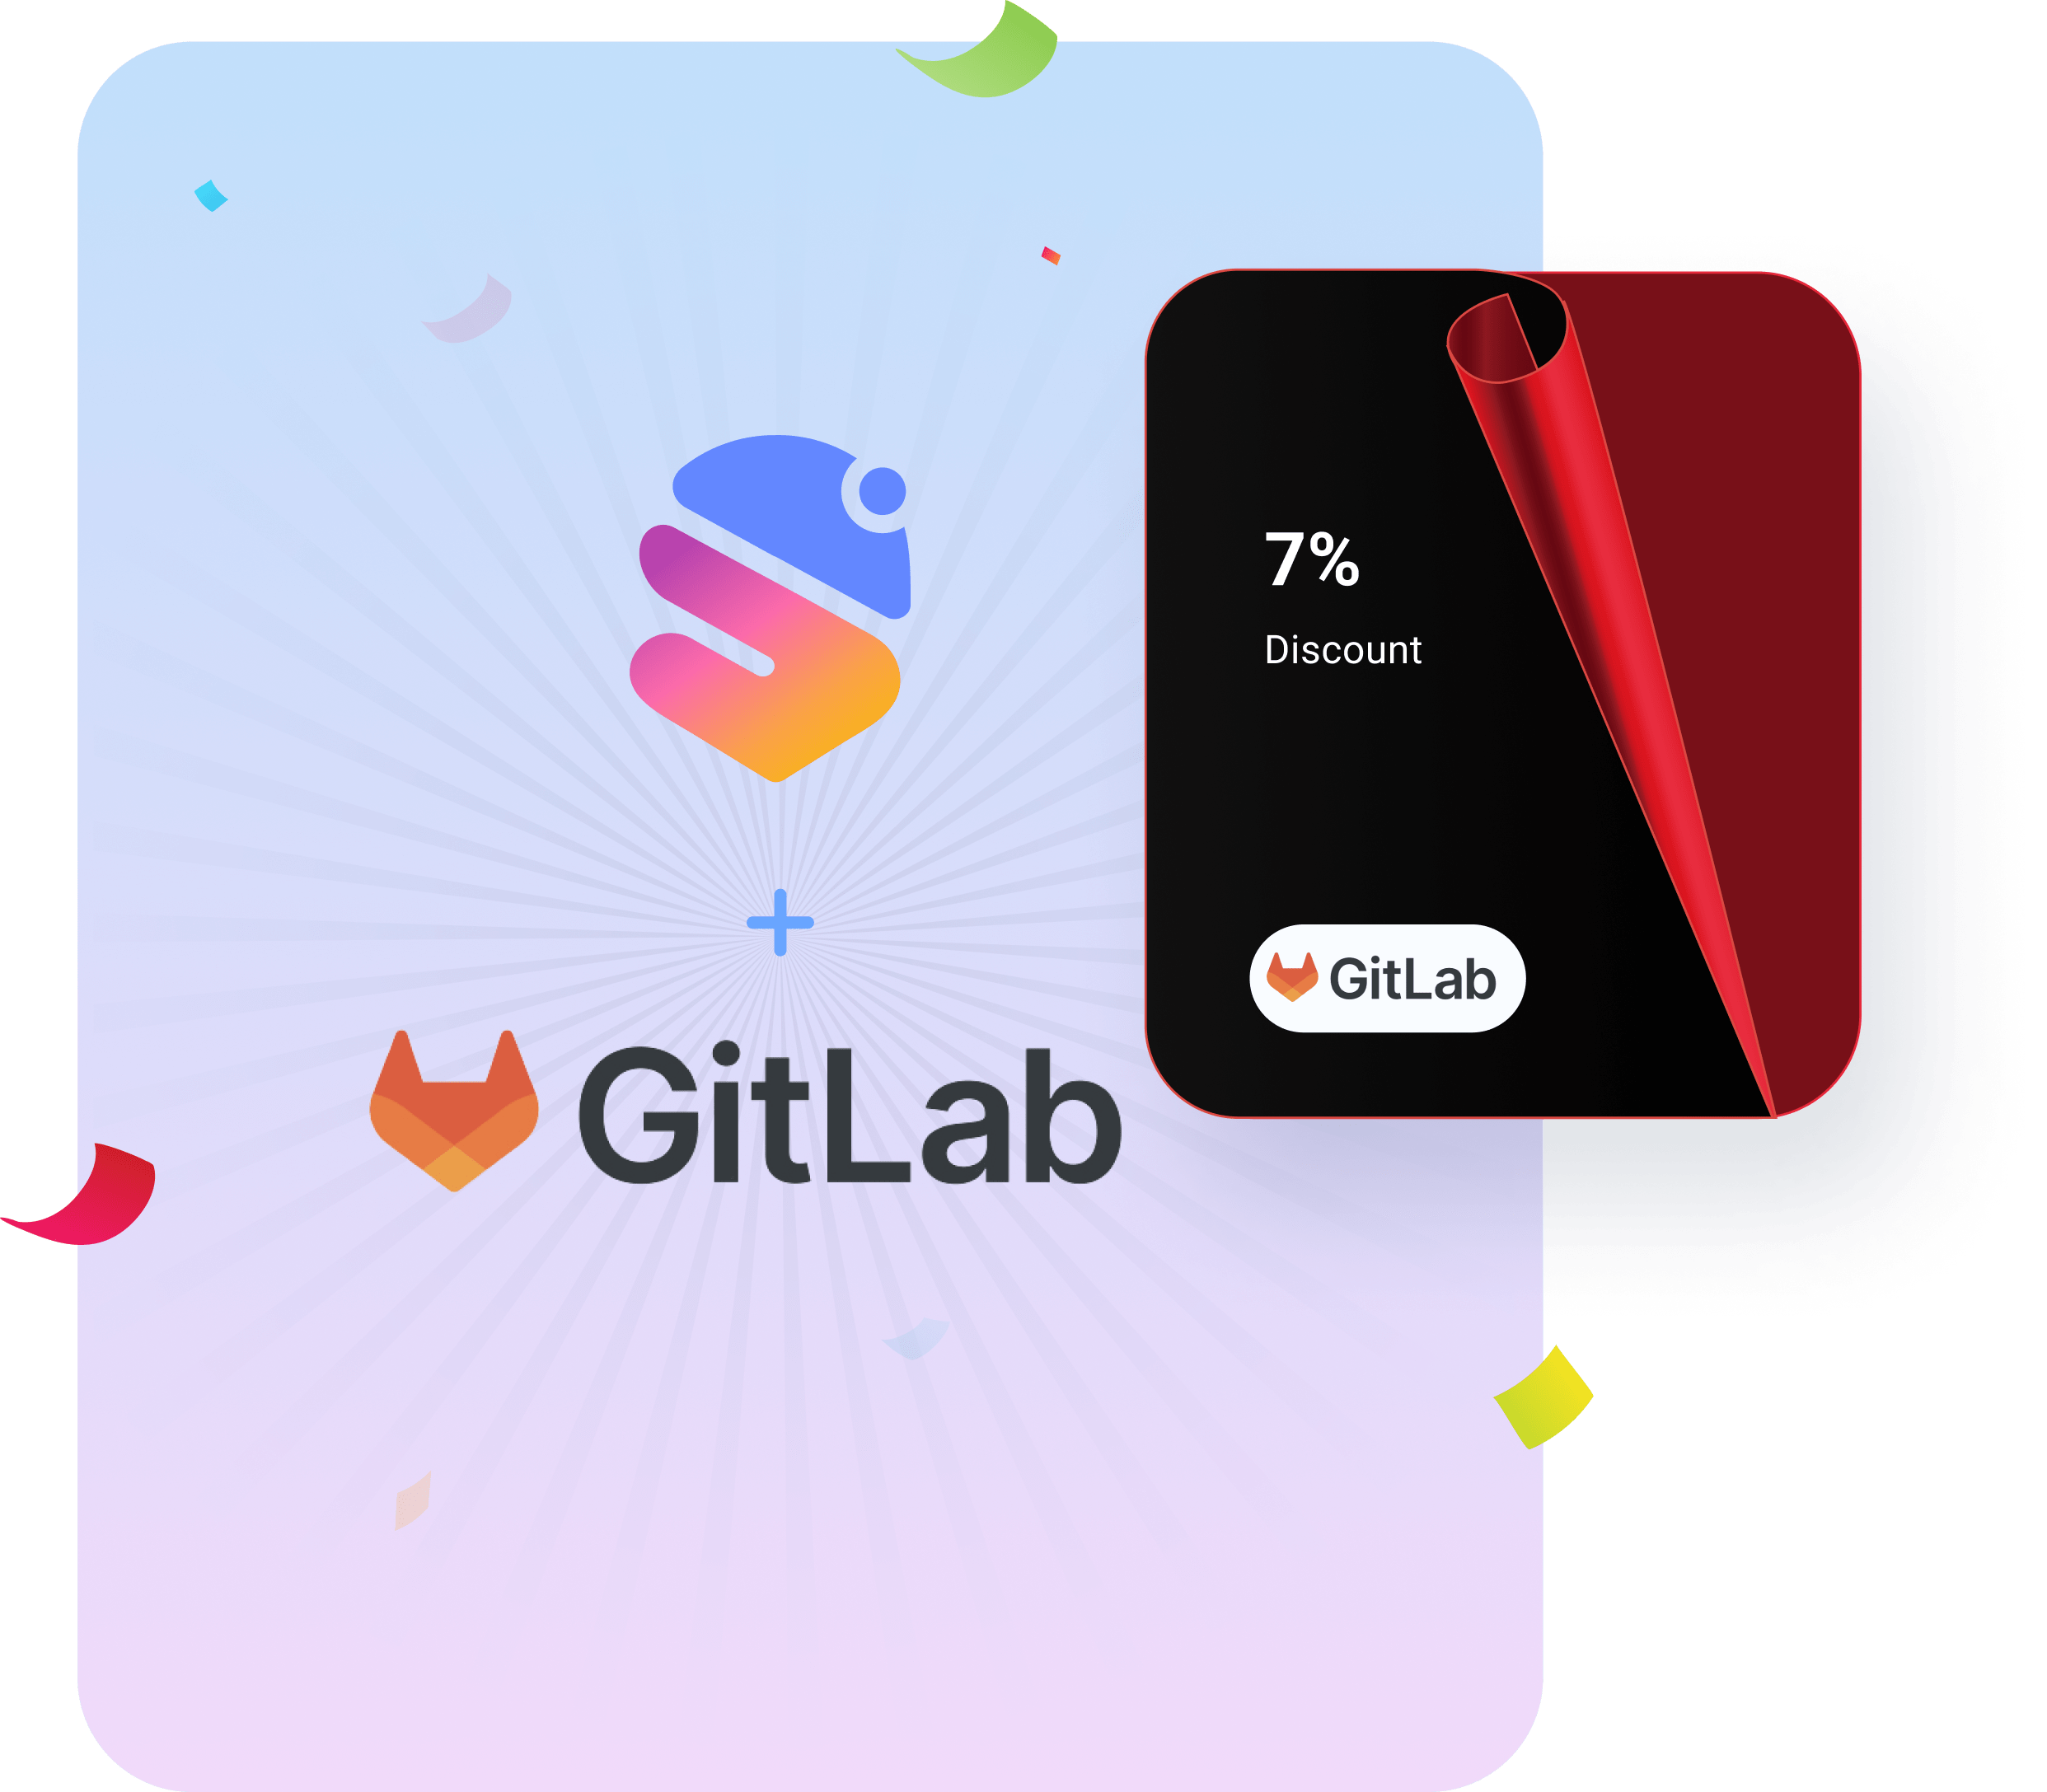 GitLab exclusive features